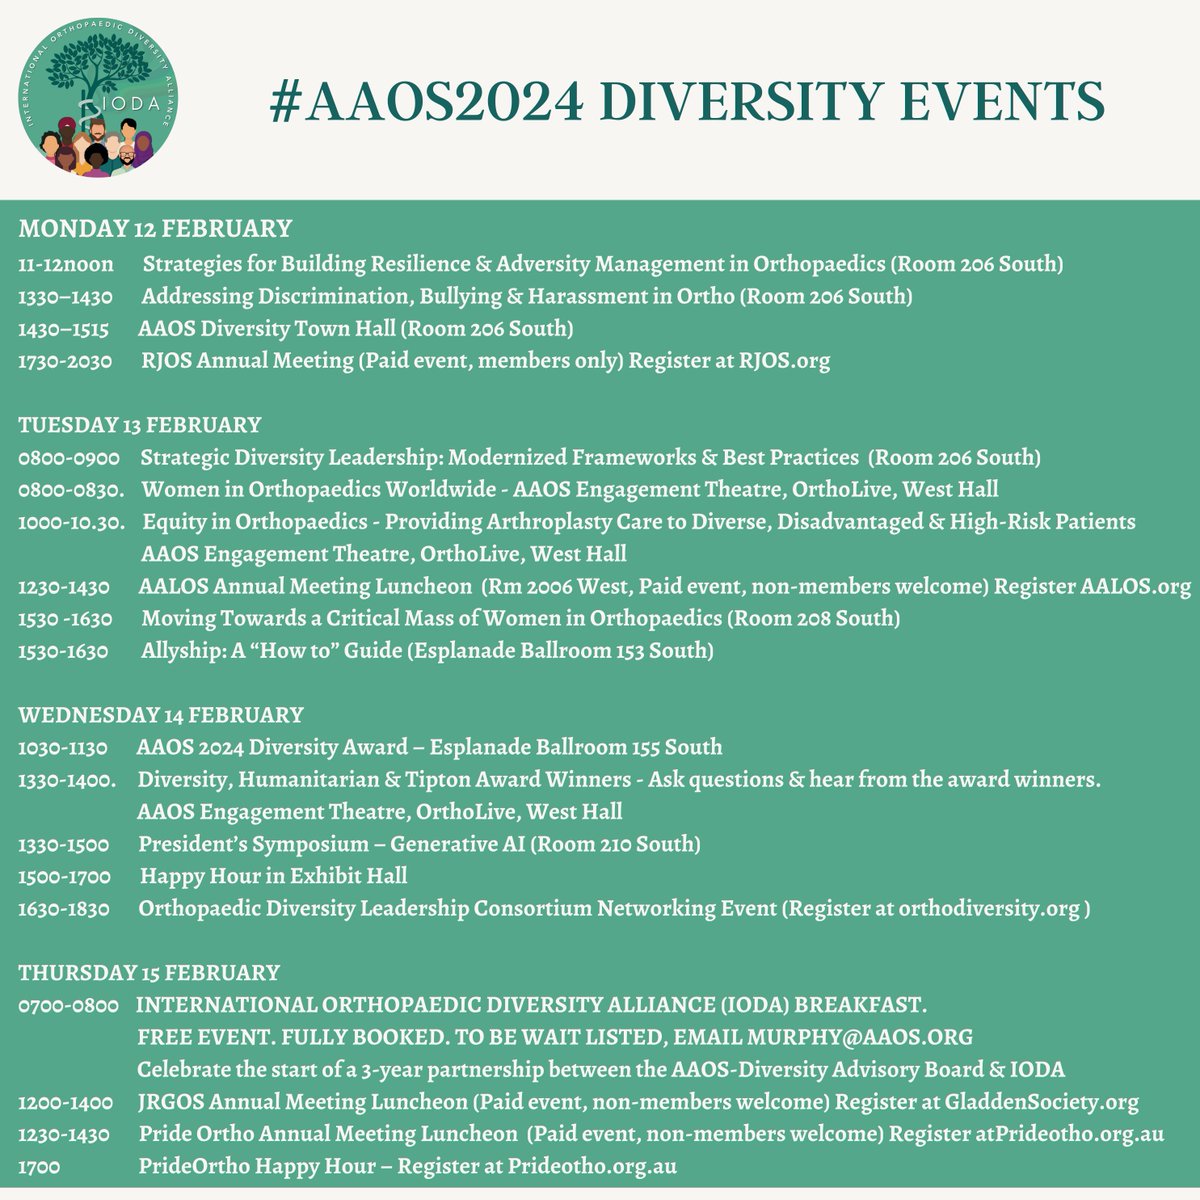 The IODA team has created a DIVERSITY EVENT timetable for #AAOS2024. We look forward to meeting with everyone who is collaborating towards a global orthopaedic culture in which everyone can thrive. #diversity #equity #inclusion #orthopaedics